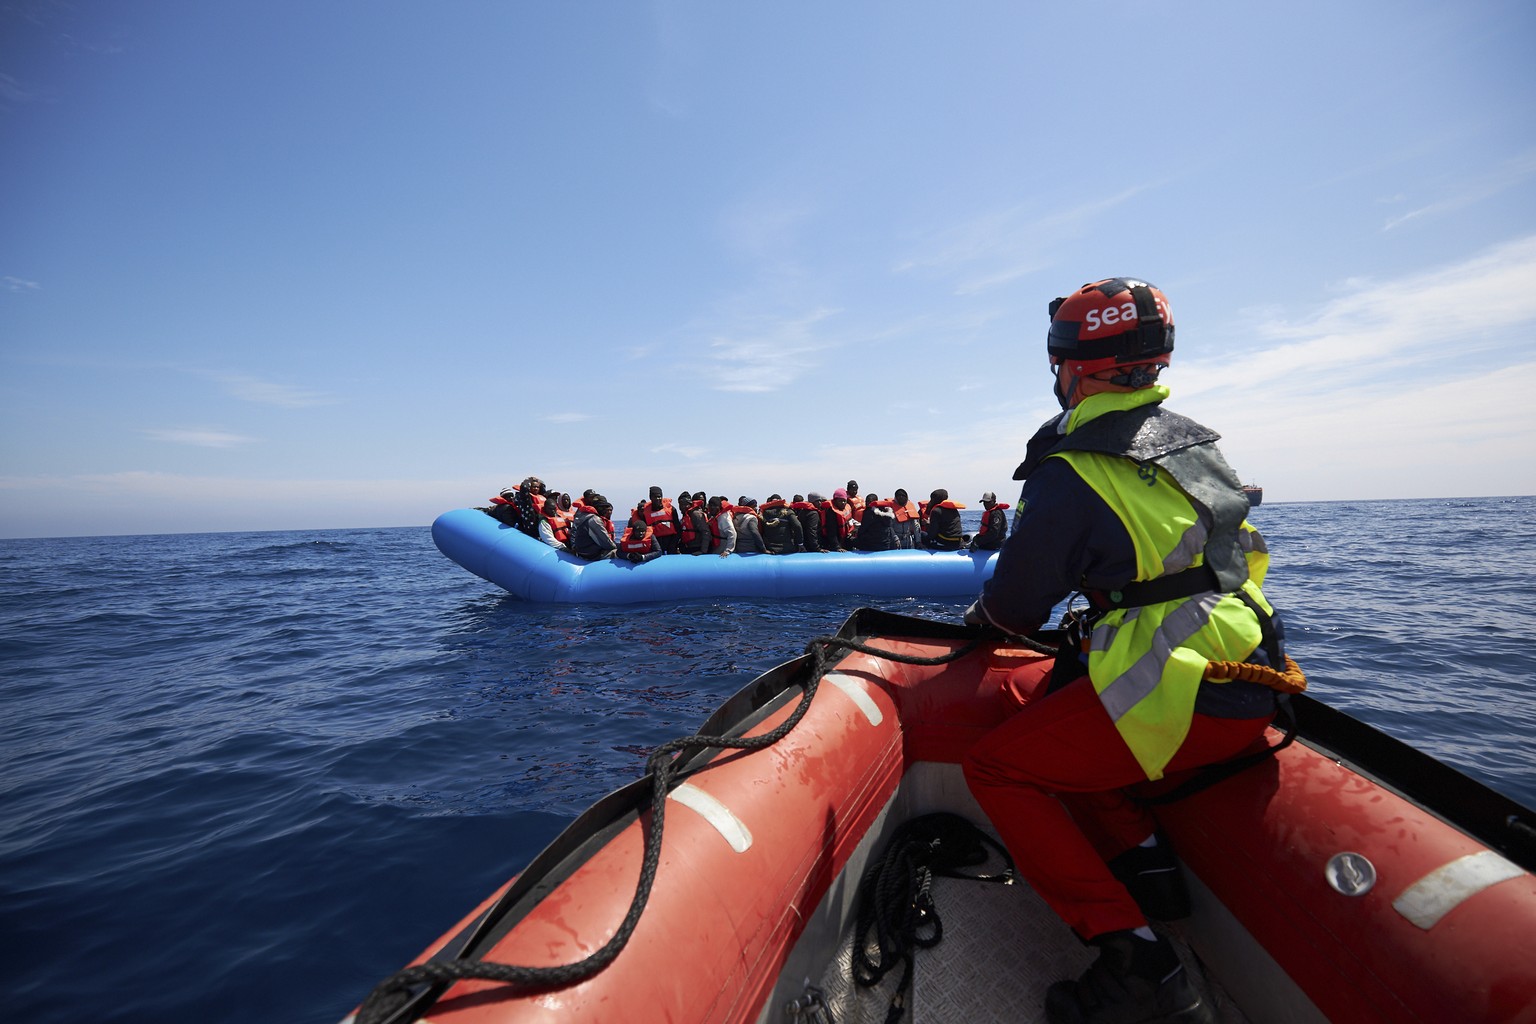 Migrants on a rubber dinghy are approached by Sea-Watch rescue ship&#039;s staffers in the waters off Libya Wednesday, April 3, 2019. The German humanitarian group Sea-Watch says the ship it operates  ...